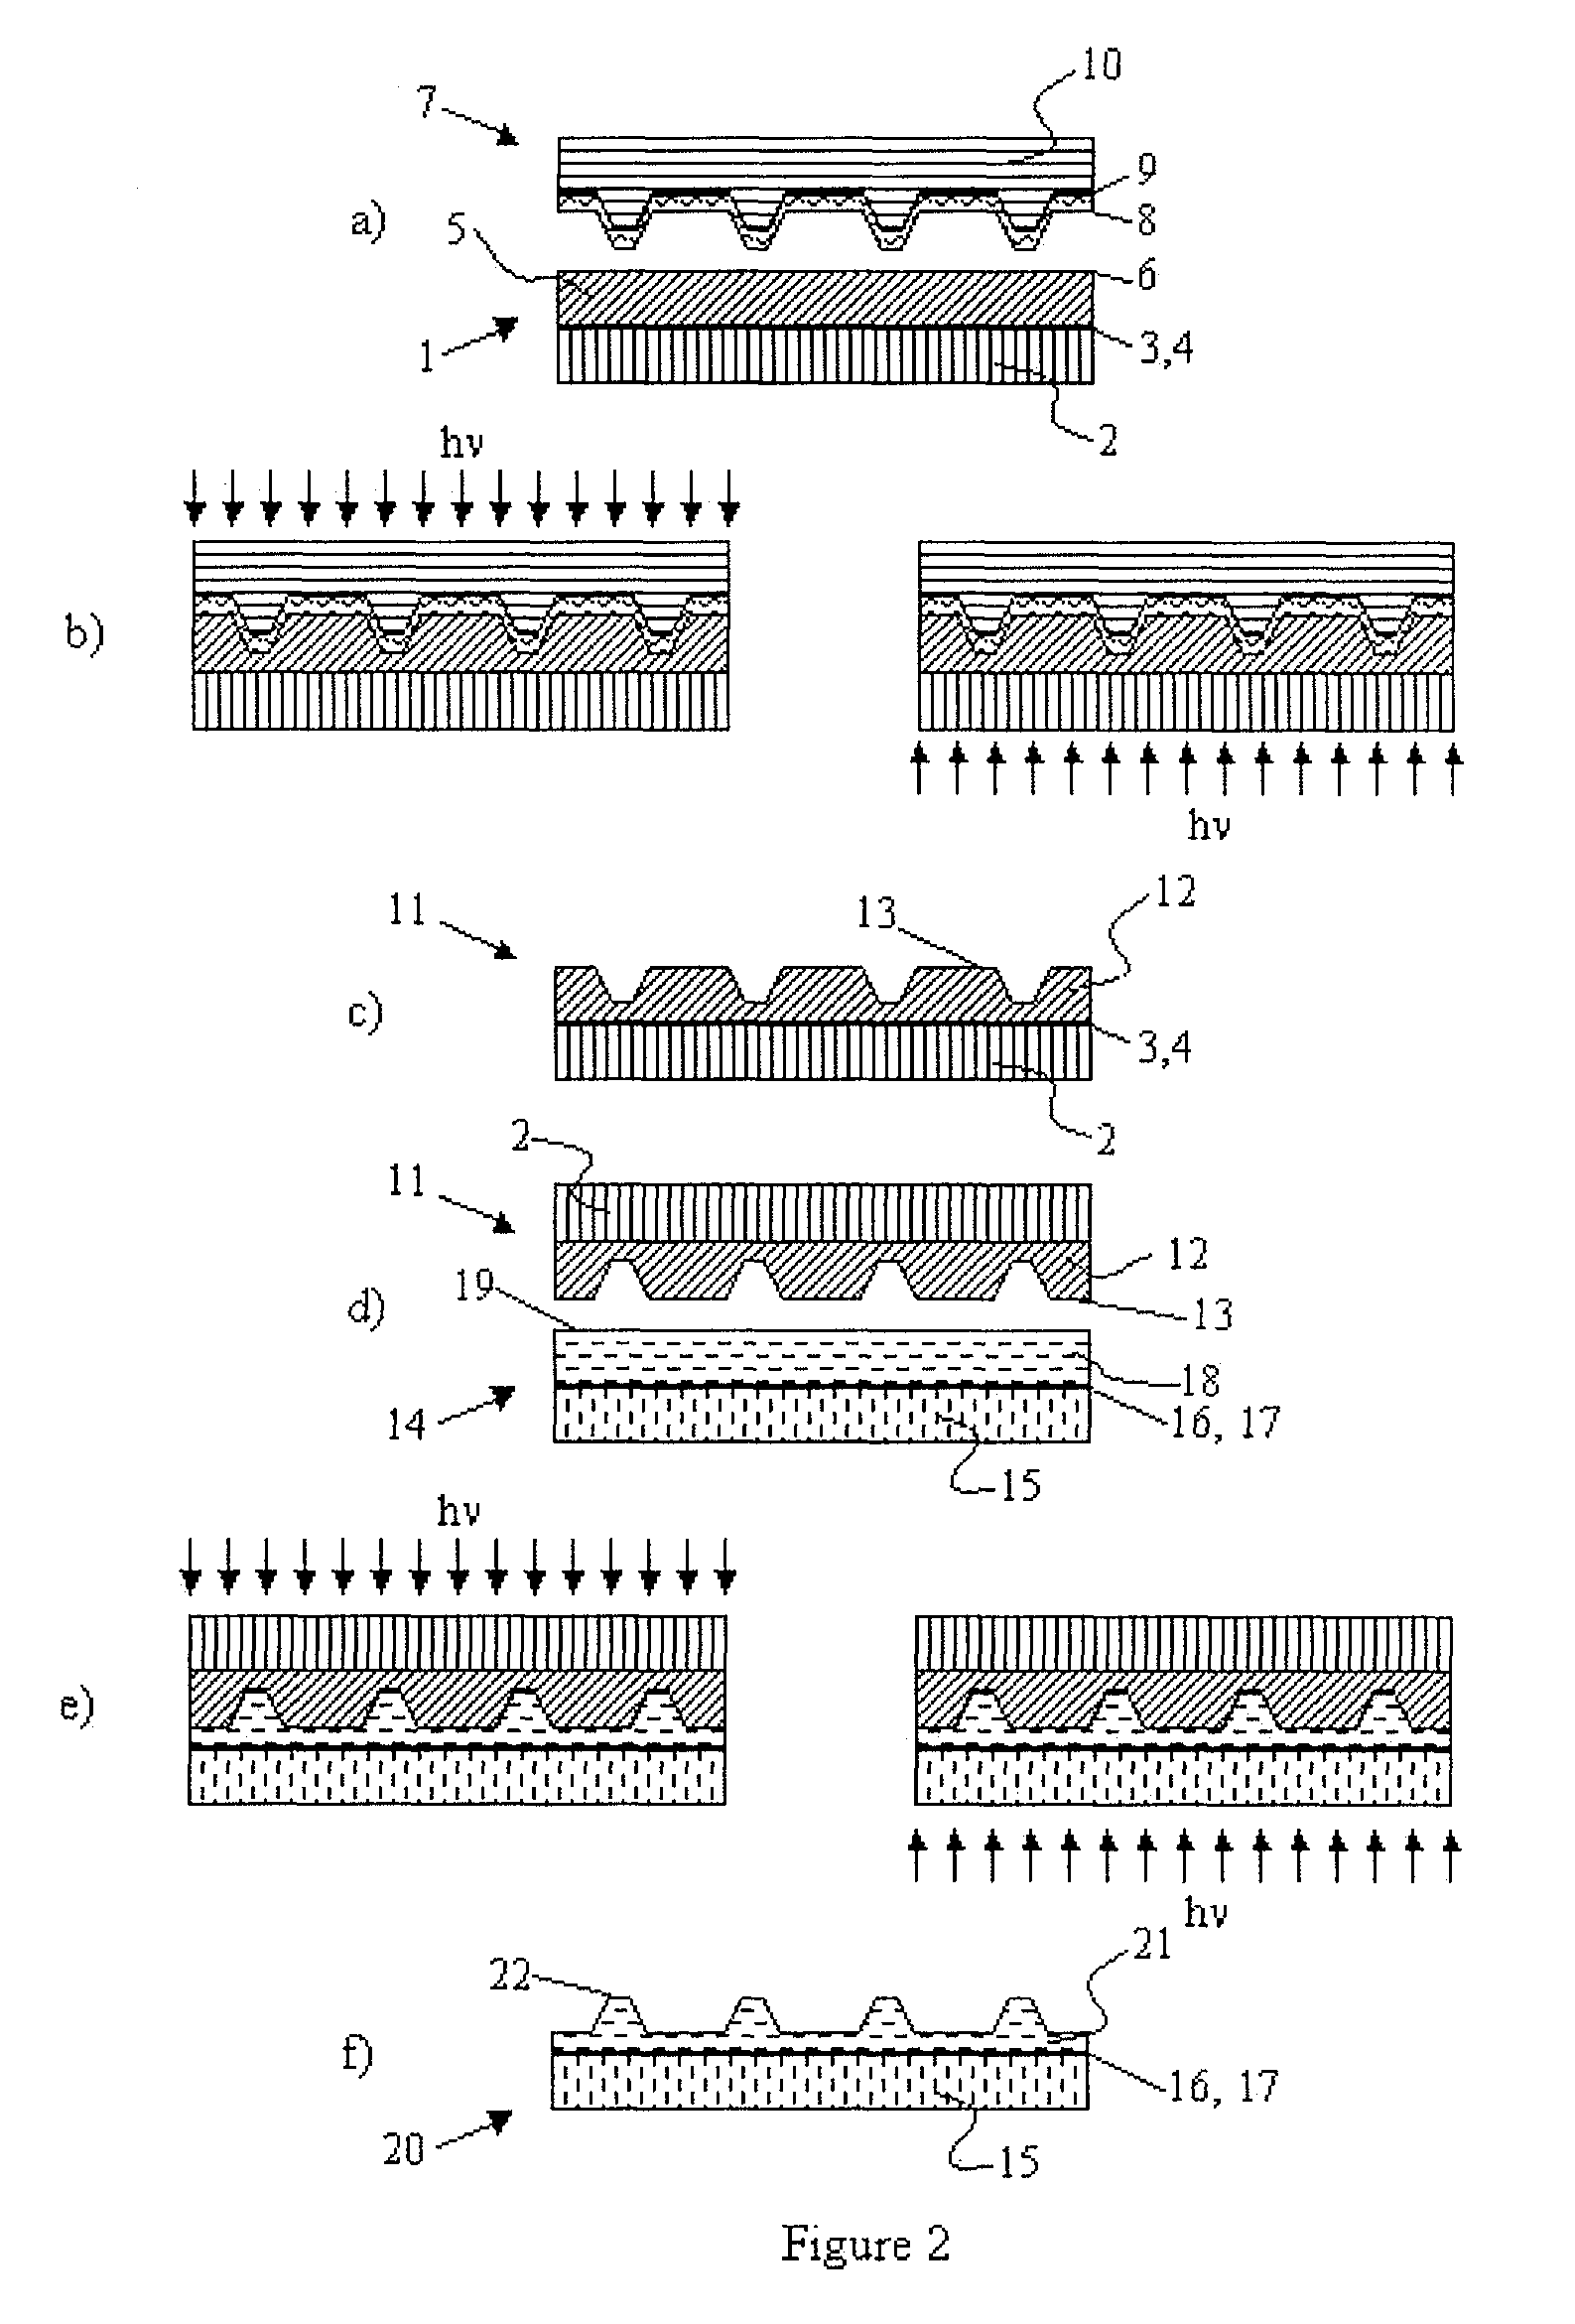 Process and method for modifying polymer film surface interaction